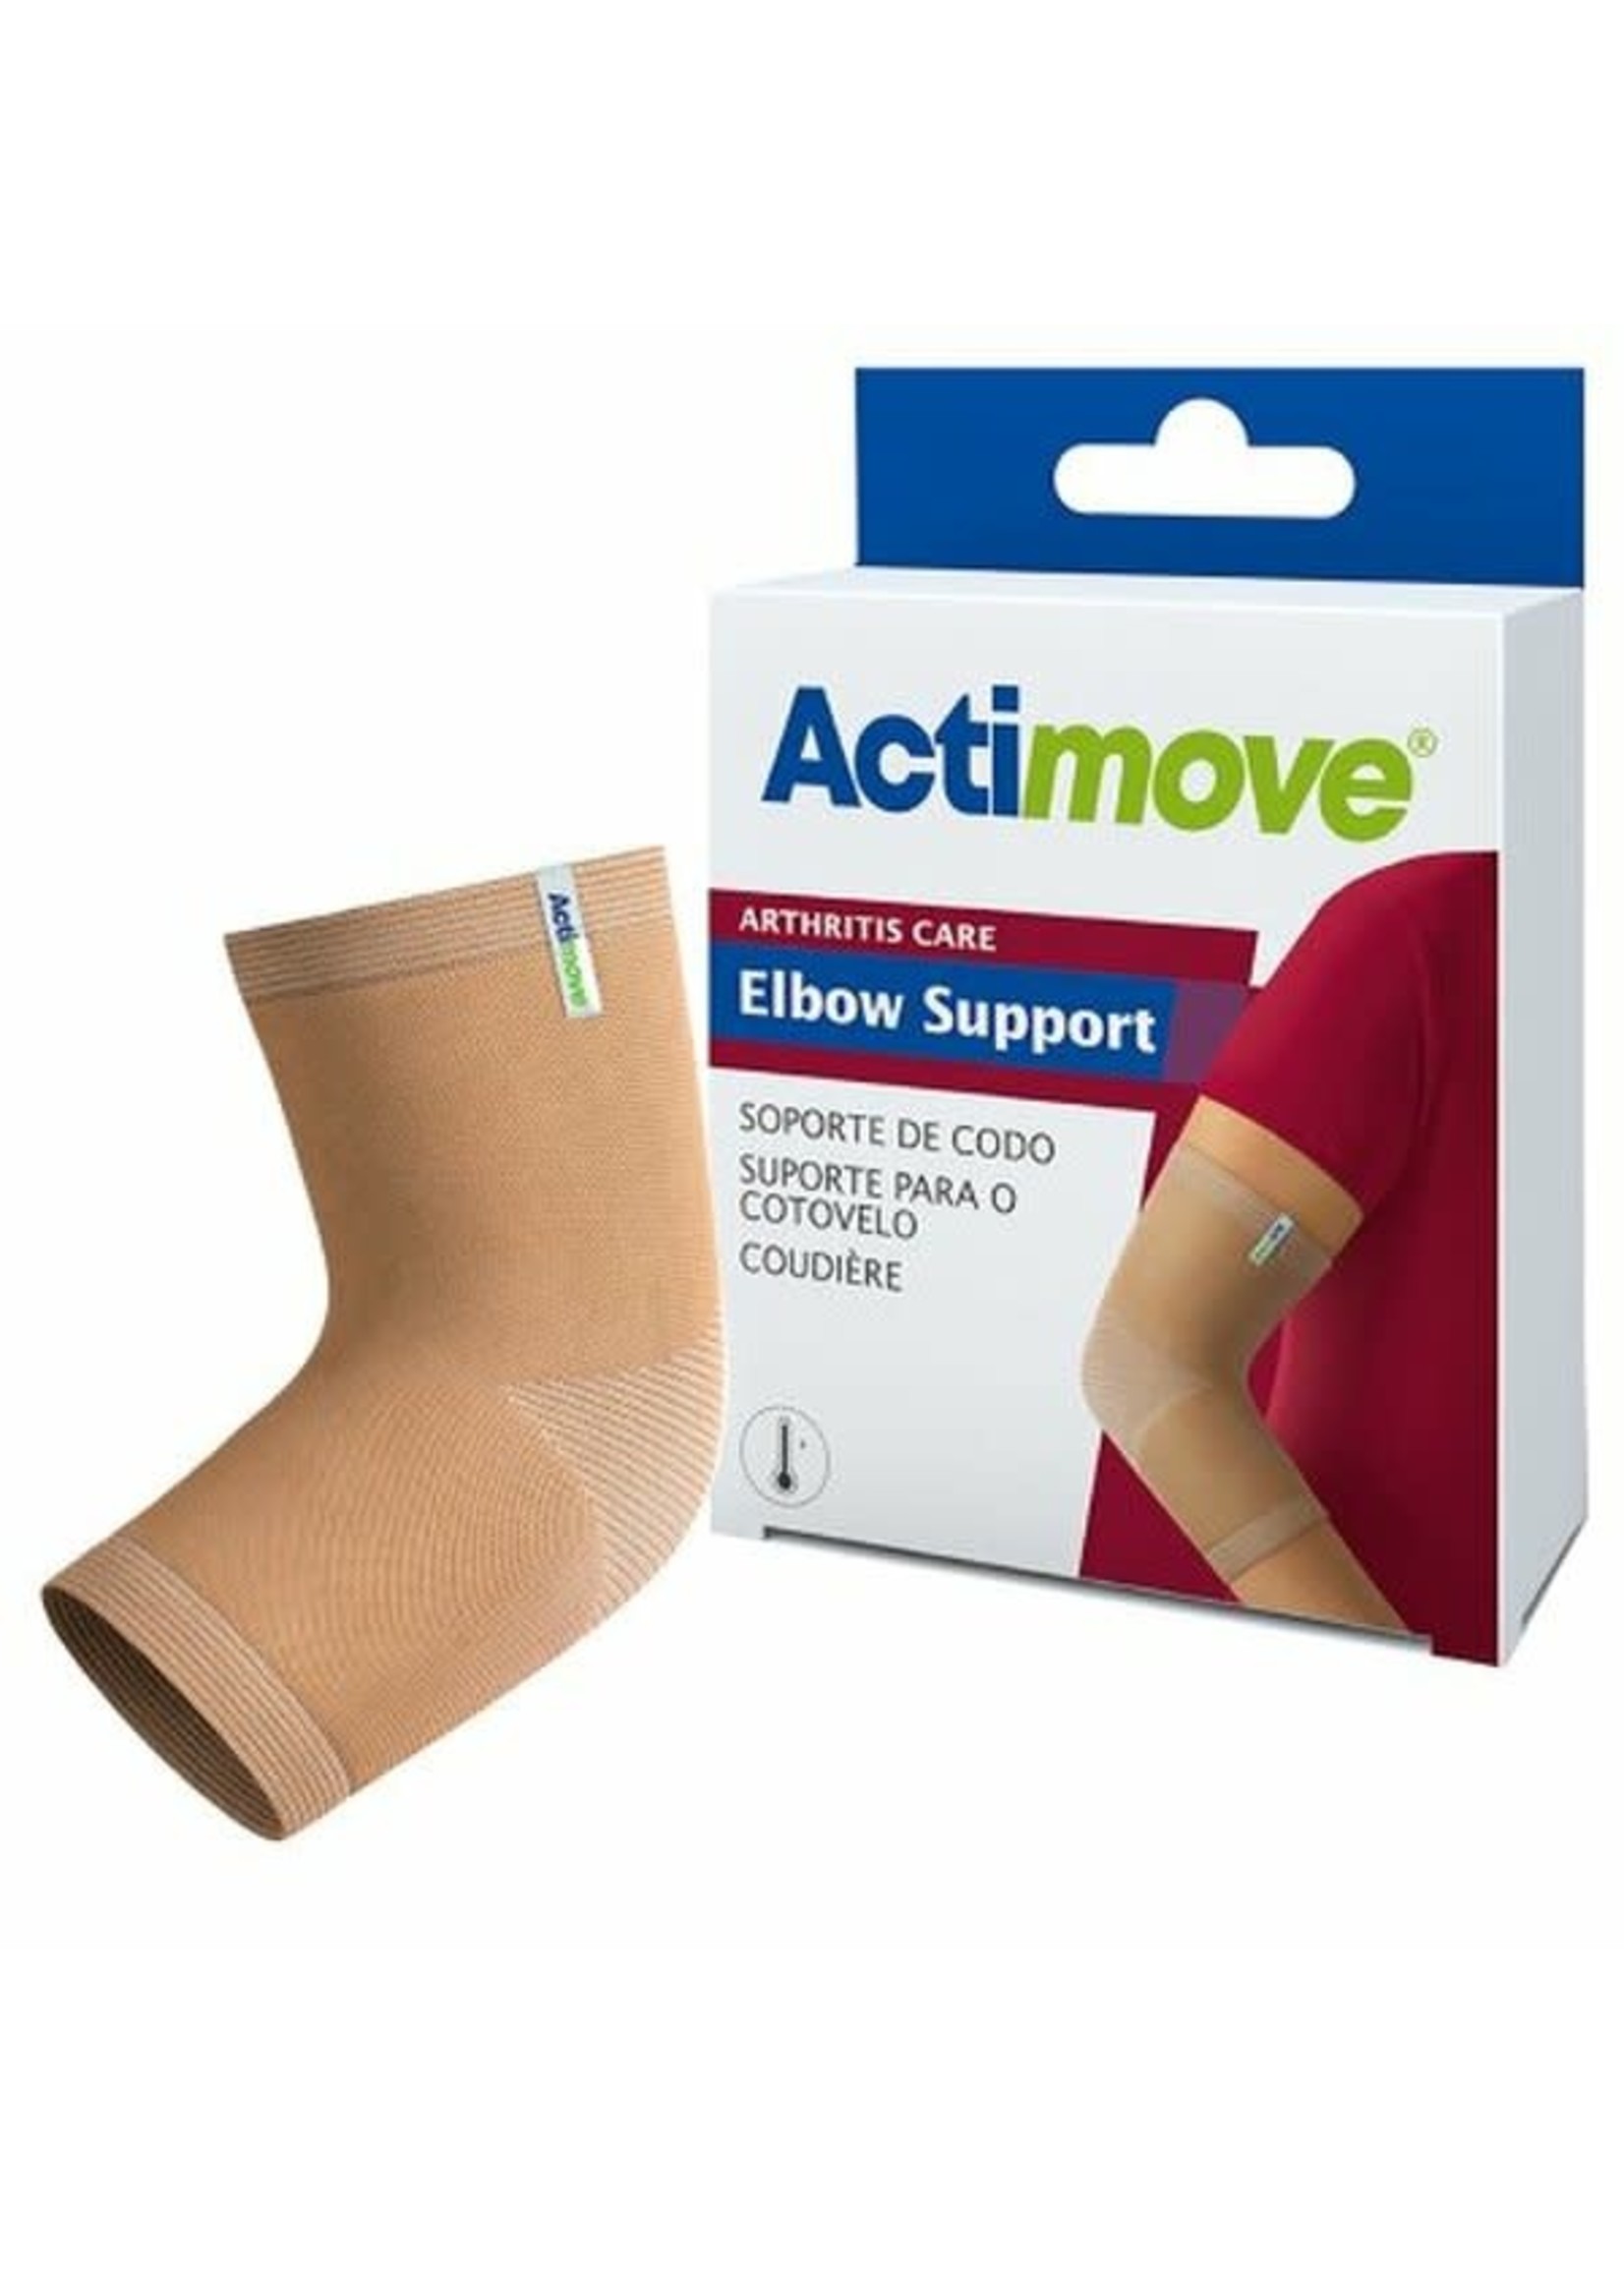 ActiMove Elbow Support